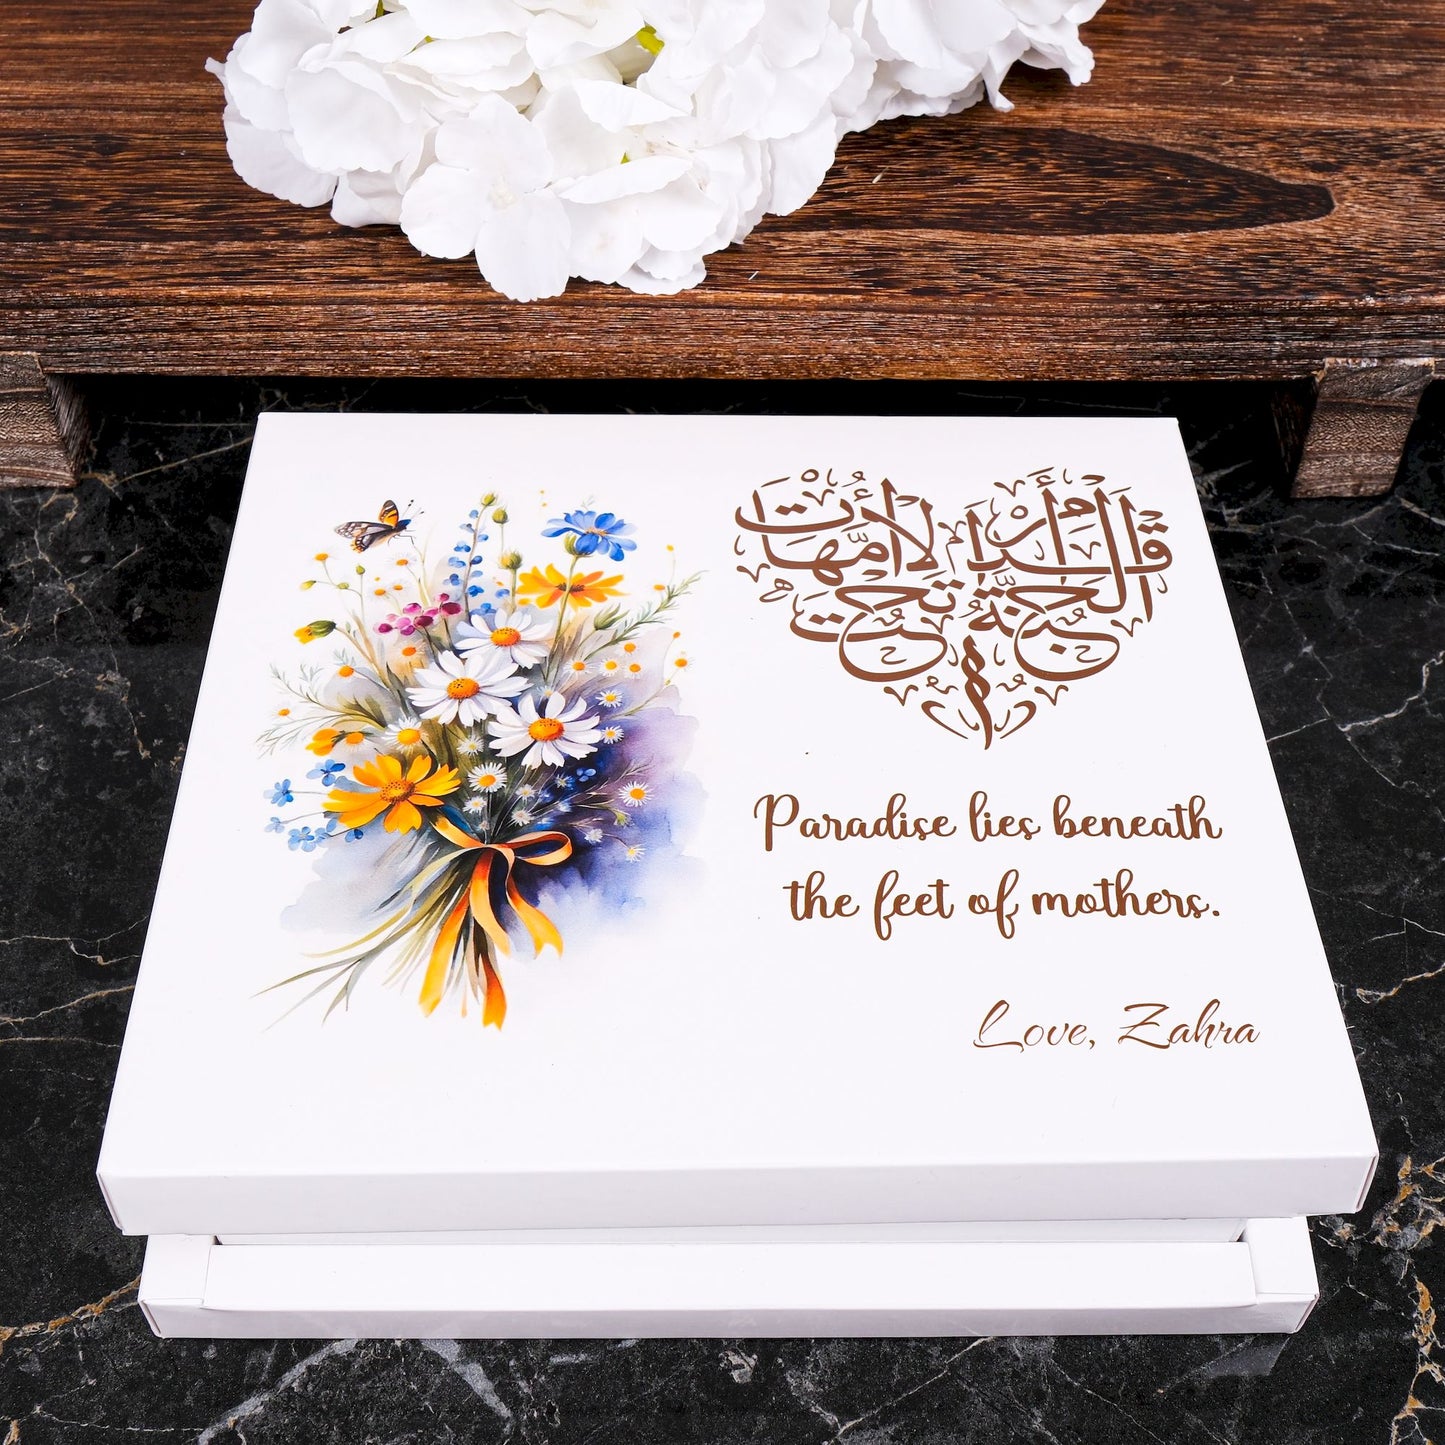 Personalized Quran Hijab Tasbeeh Dhikr Counter Bookmark Gift Set - Islamic Elite Favors is a handmade gift shop offering a wide variety of unique and personalized gifts for all occasions. Whether you're looking for the perfect Ramadan, Eid, Hajj, wedding gift or something special for a birthday, baby shower or anniversary, we have something for everyone. High quality, made with love.